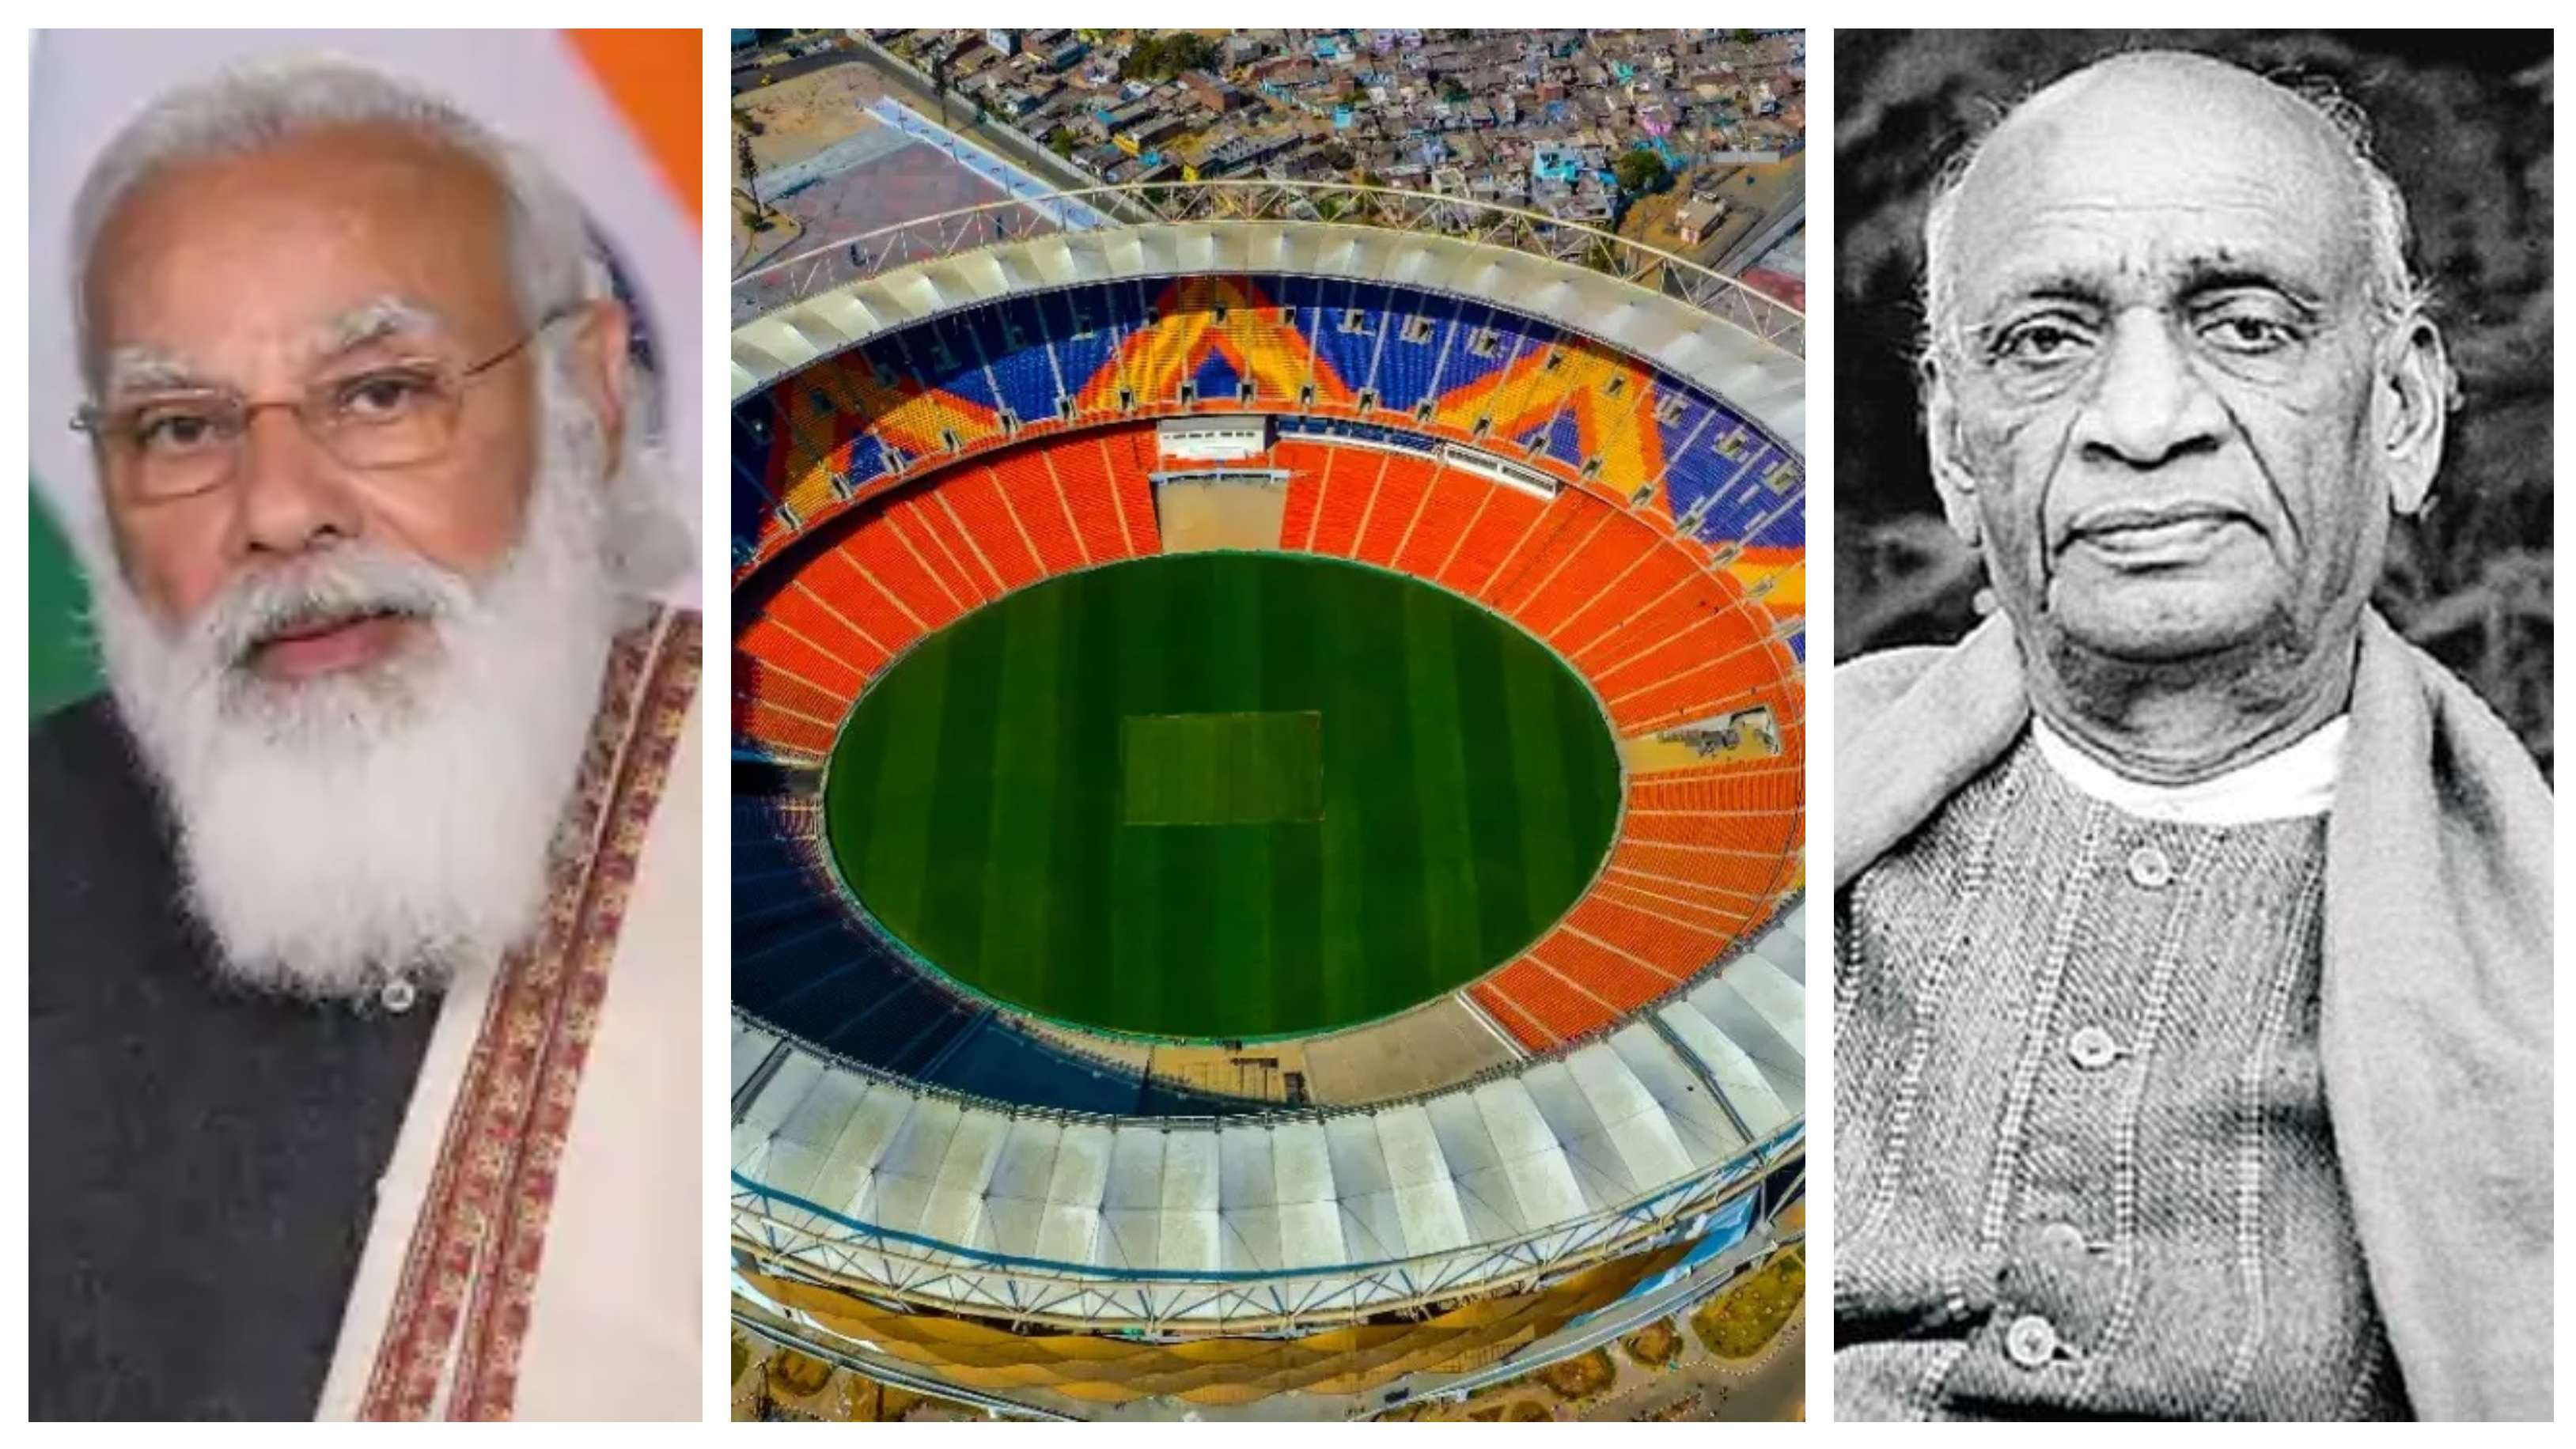 IND v ENG 2021: Government clarifies only Motera stadium renamed after PM Modi, complex still has Sardar Patel name